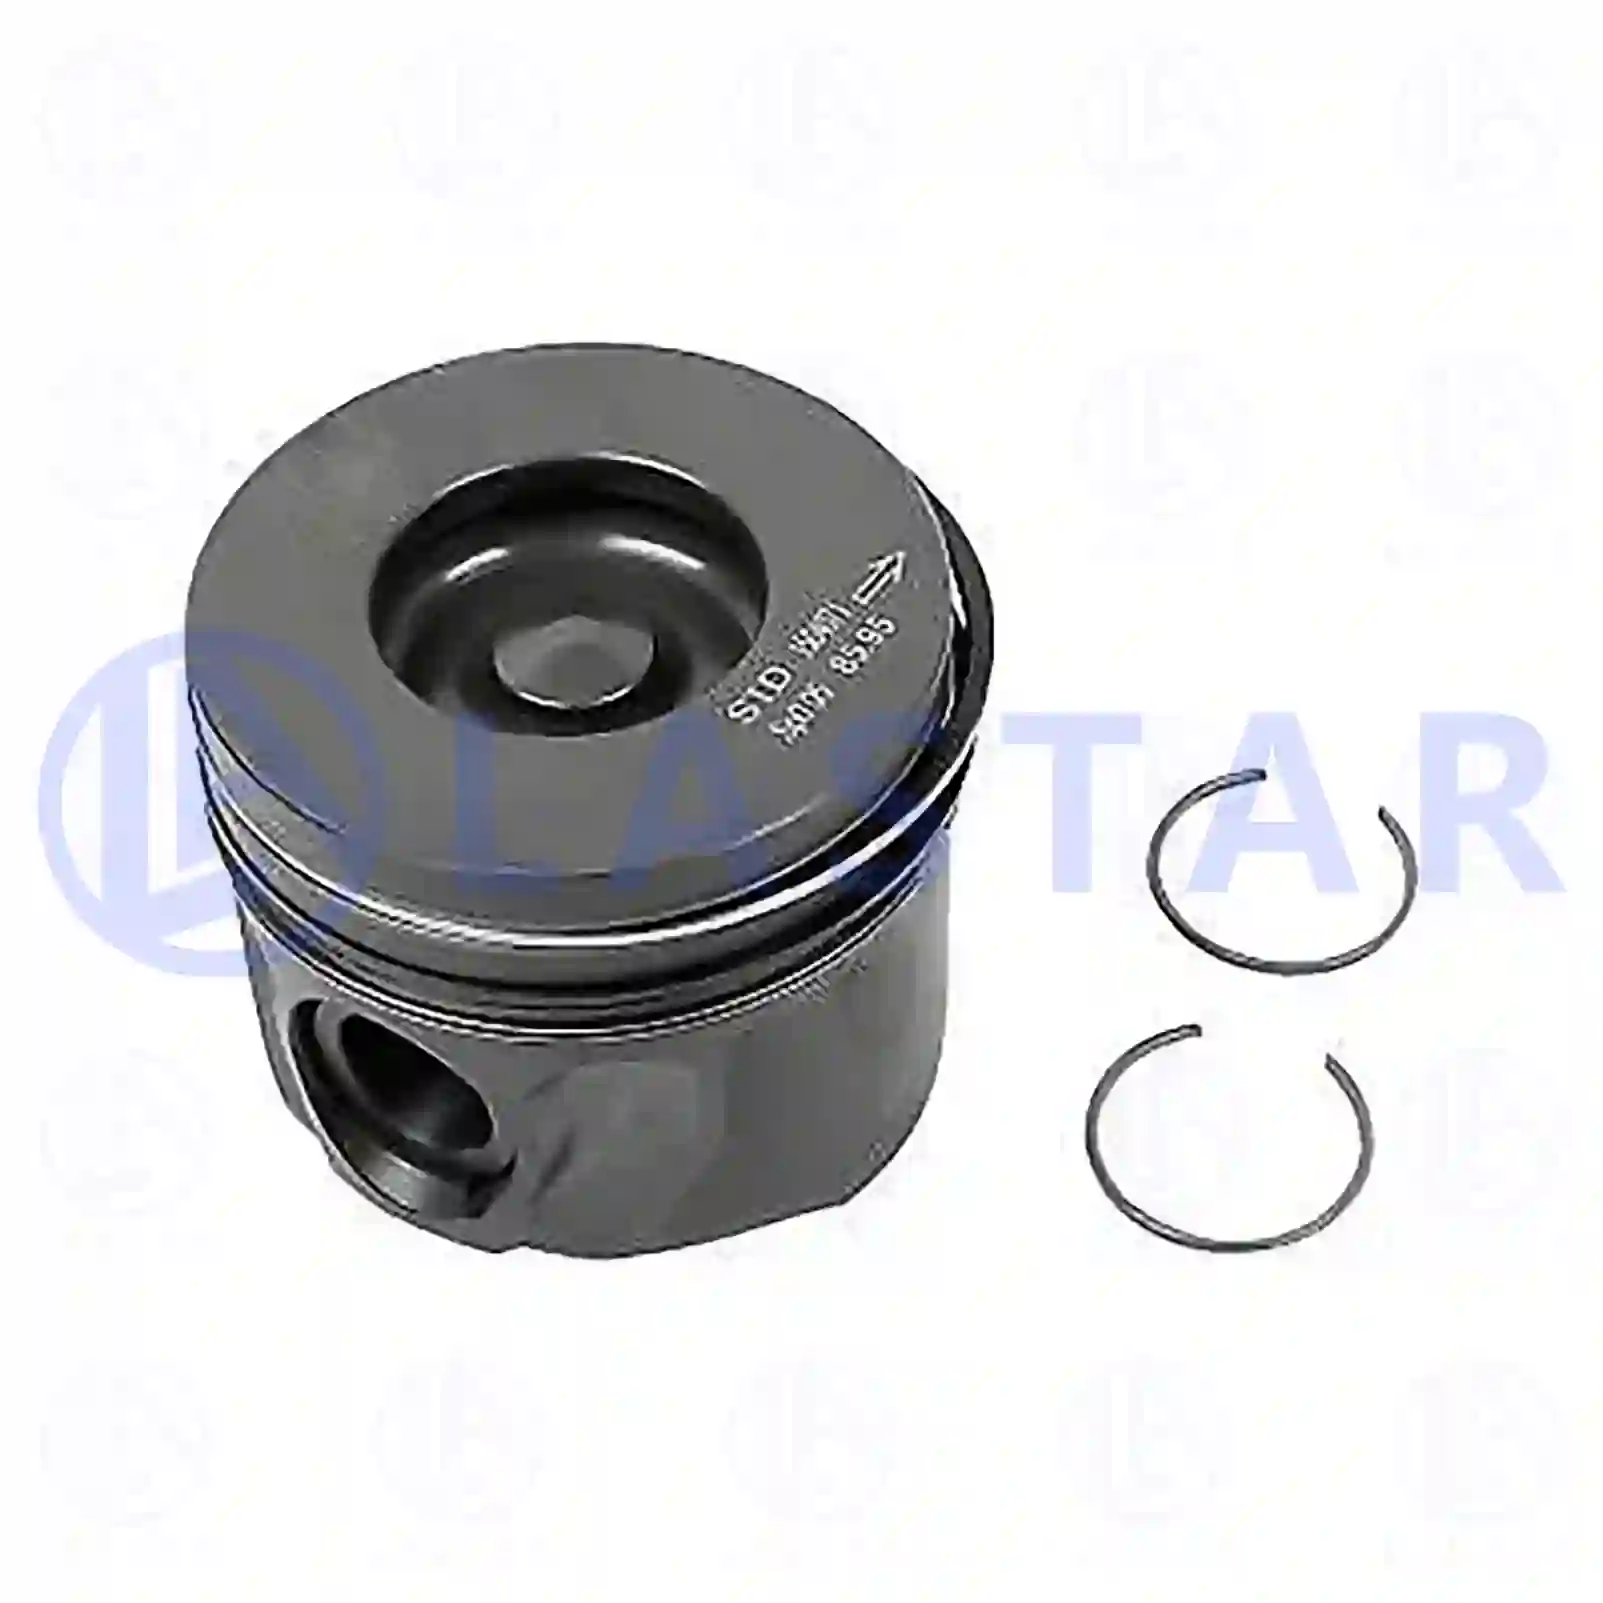 Piston, complete with rings, 77700677, 1346663, 2S7Q-6K100-FAA ||  77700677 Lastar Spare Part | Truck Spare Parts, Auotomotive Spare Parts Piston, complete with rings, 77700677, 1346663, 2S7Q-6K100-FAA ||  77700677 Lastar Spare Part | Truck Spare Parts, Auotomotive Spare Parts